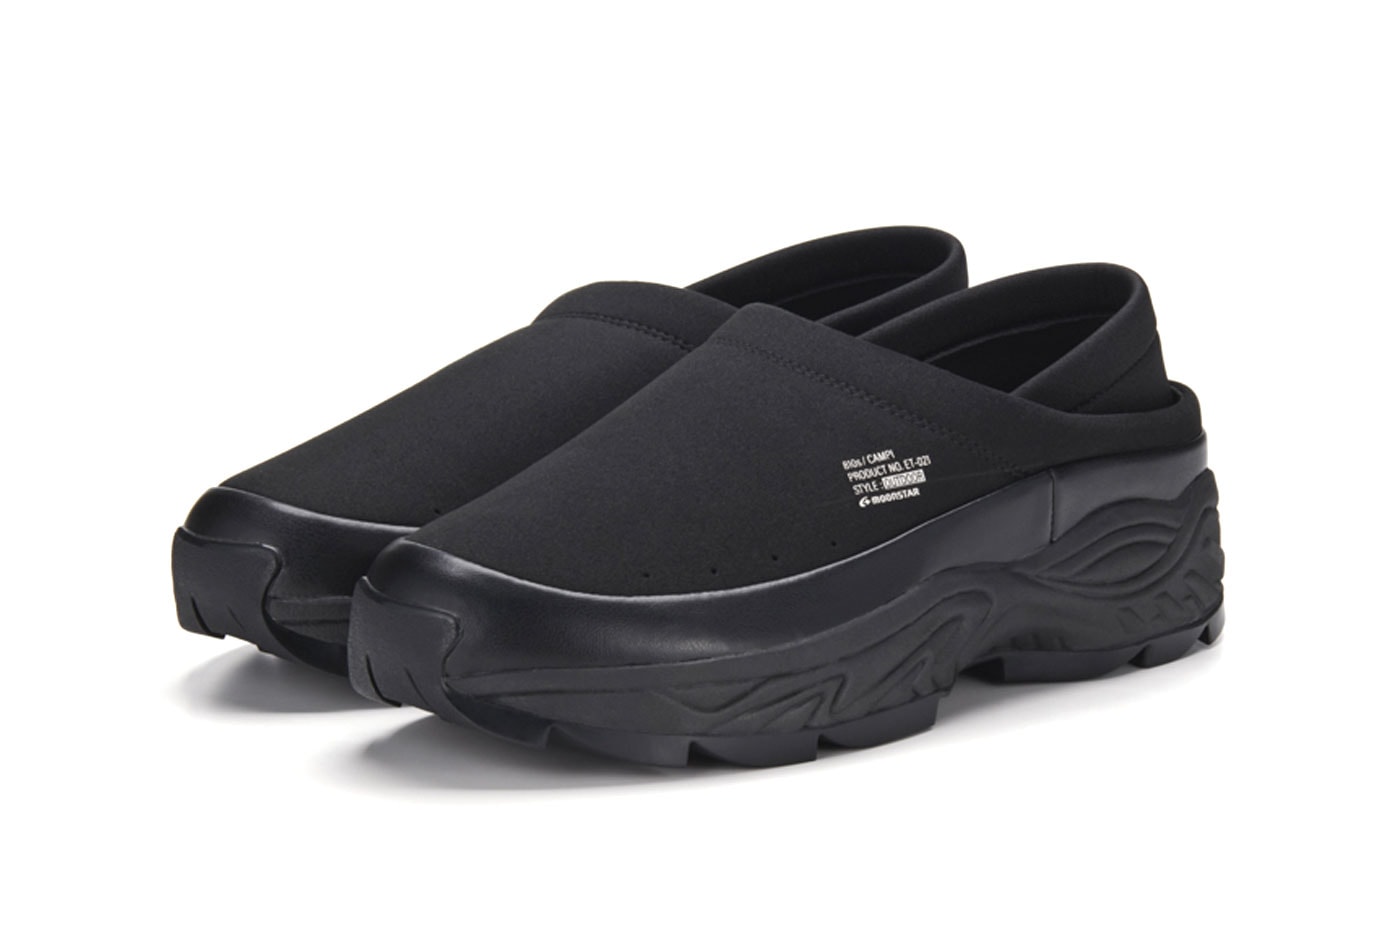 Moonstar 810s Campi Slip-Ons black grege synthetic leather mesh rubber release info